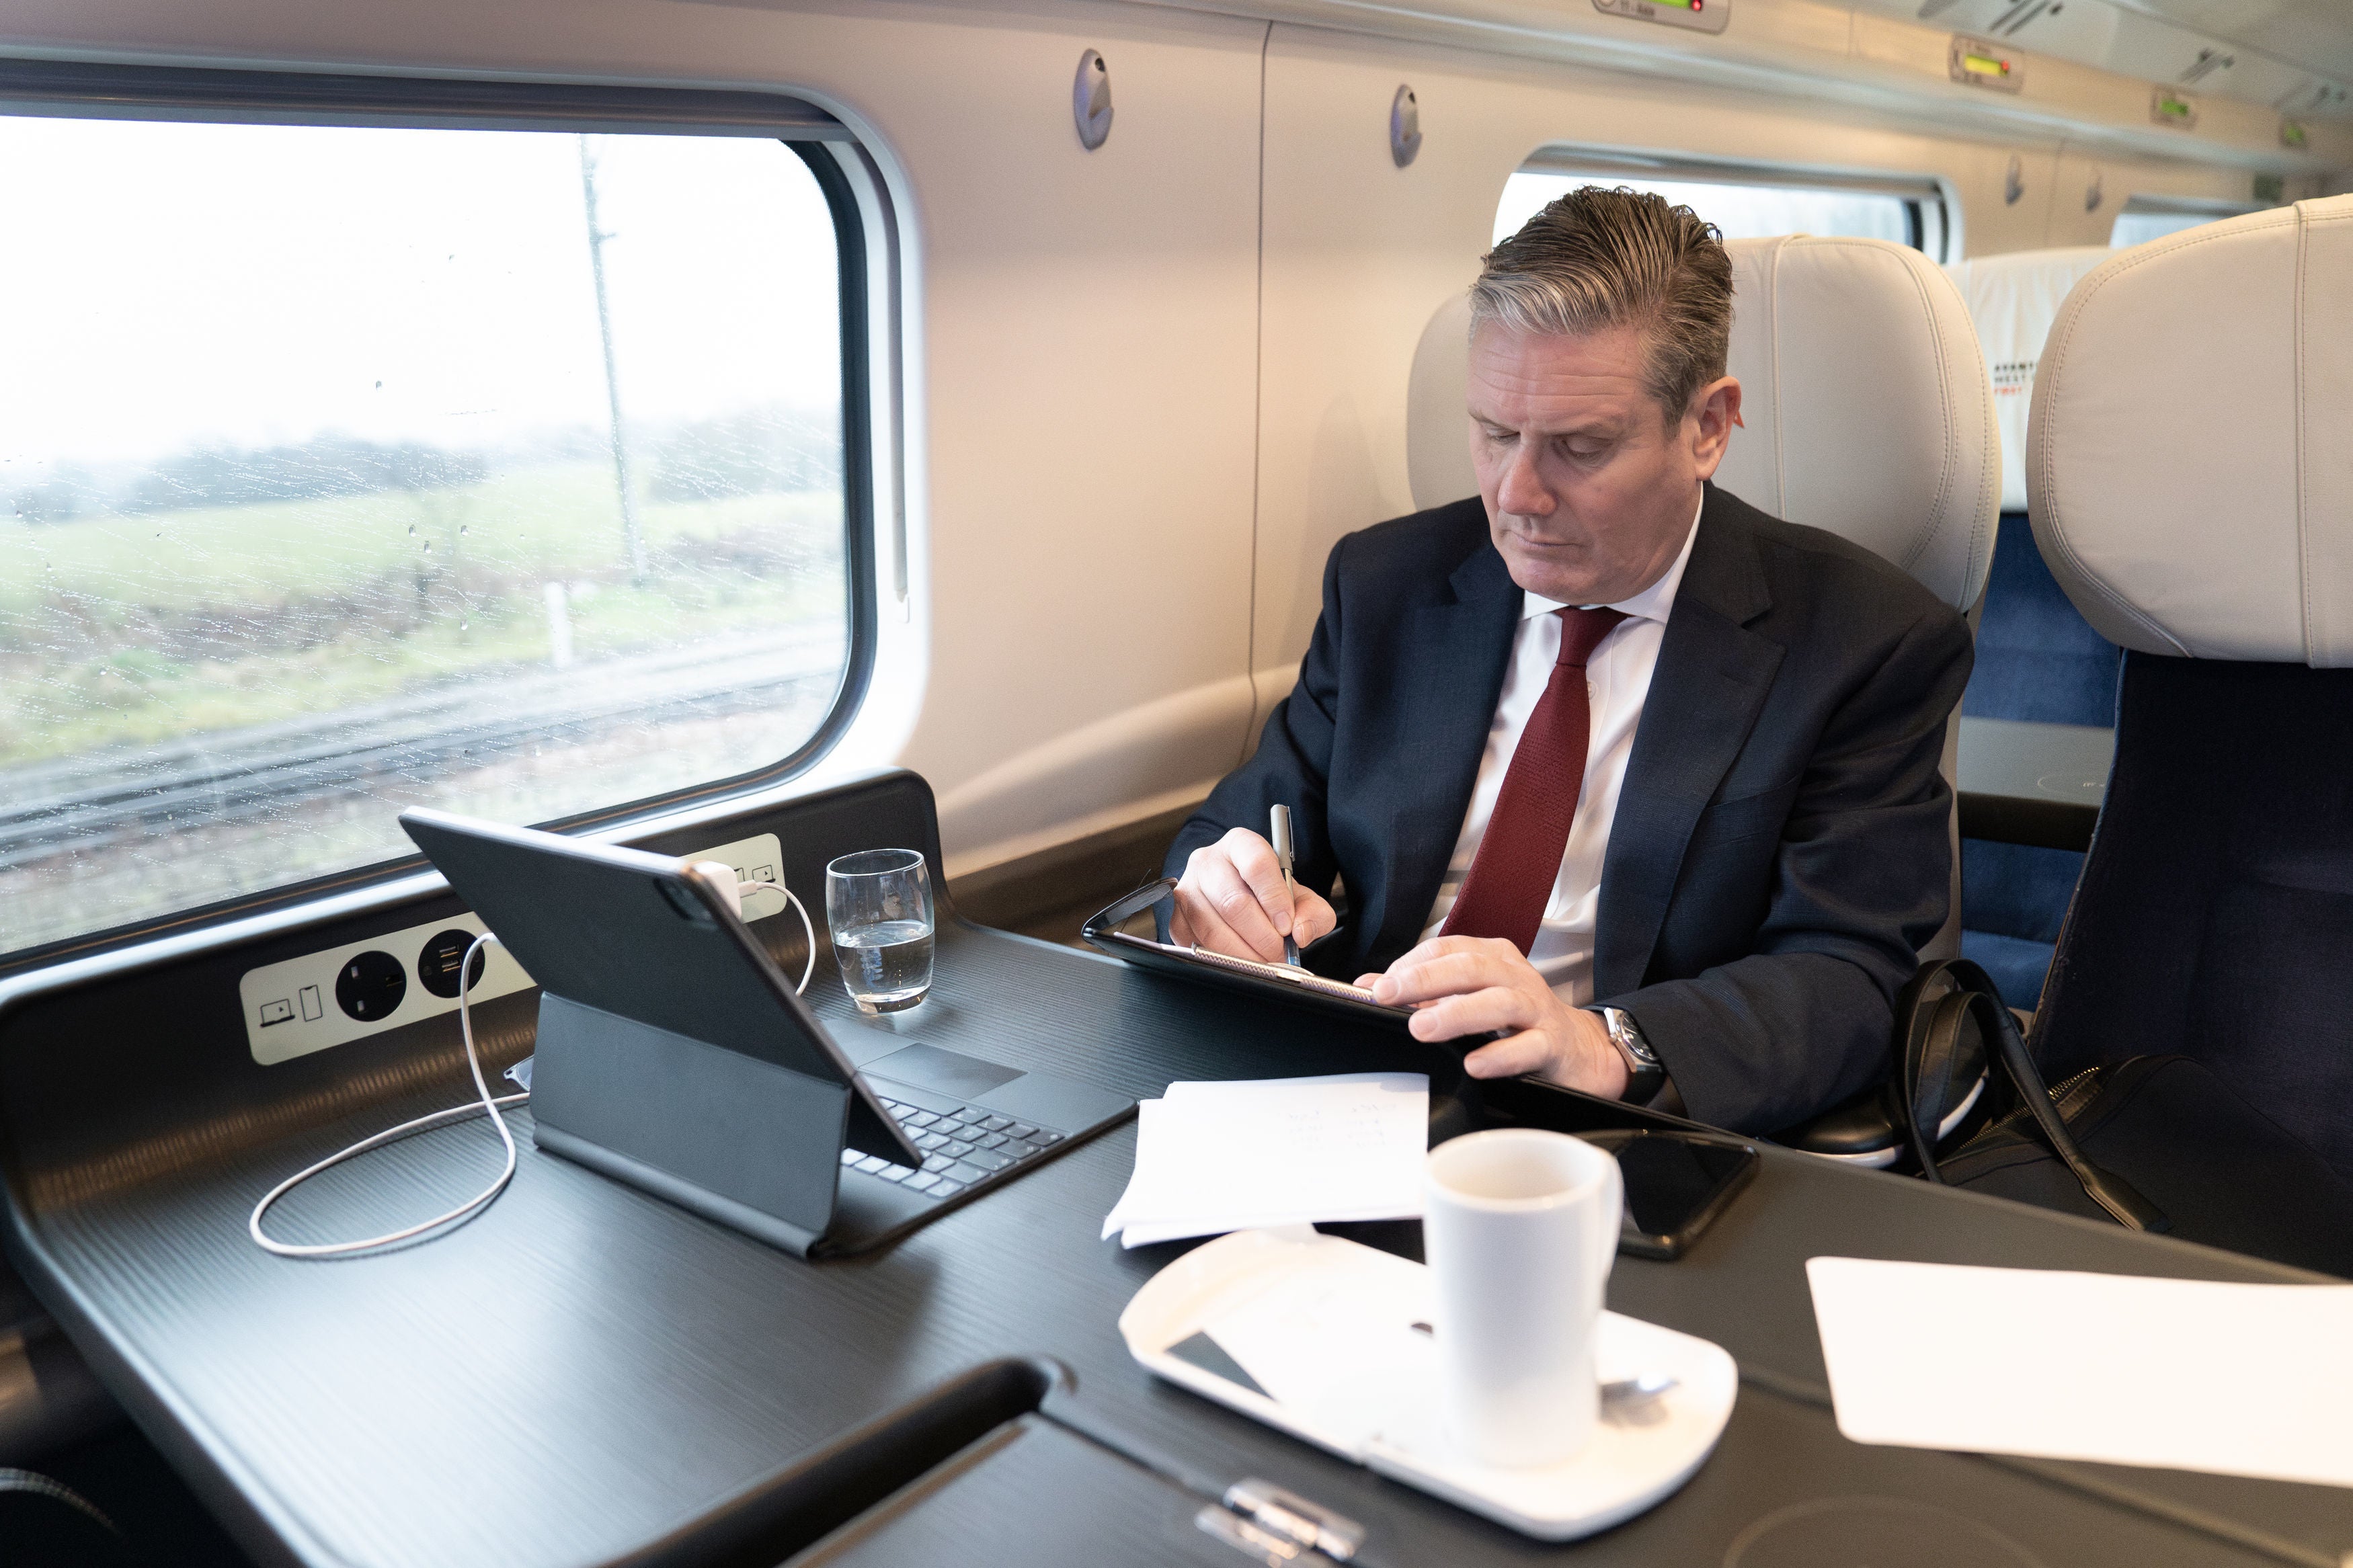 Labour and Keir Starmer have promised to reform Britain’s ailing railways